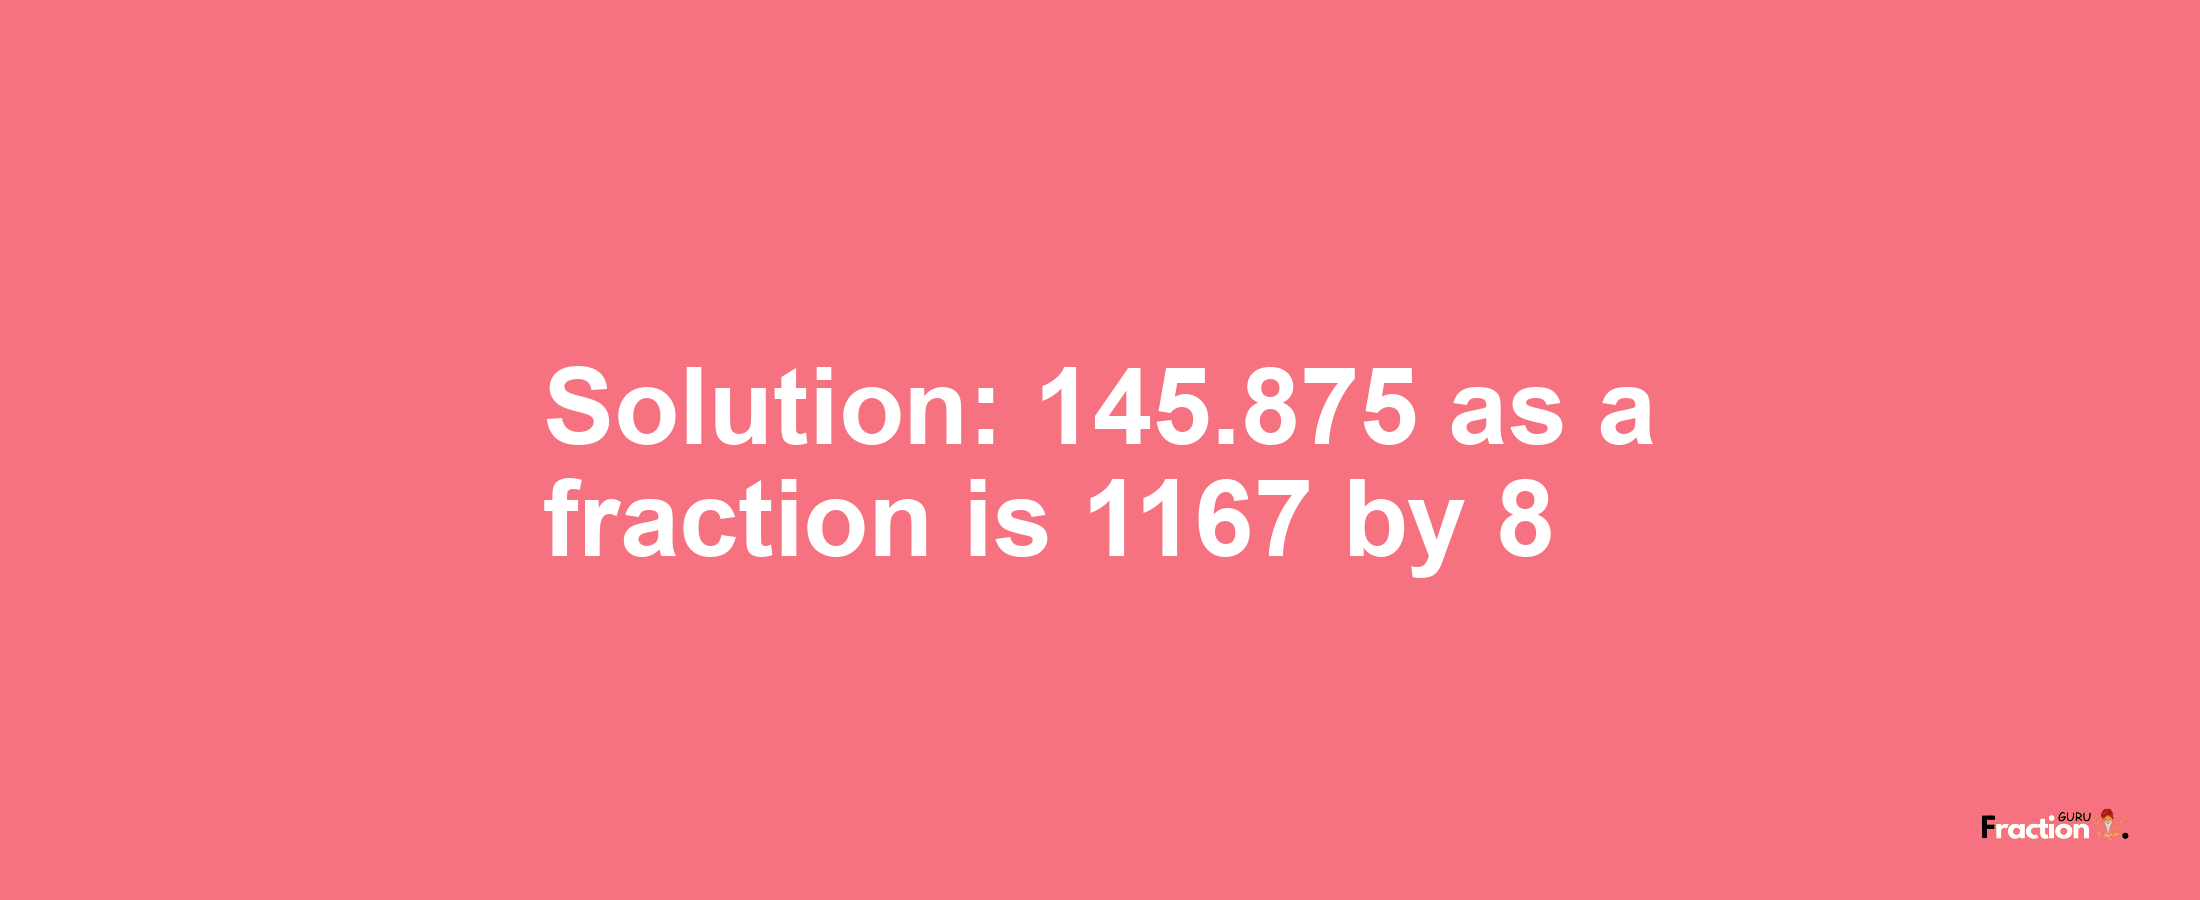 Solution:145.875 as a fraction is 1167/8